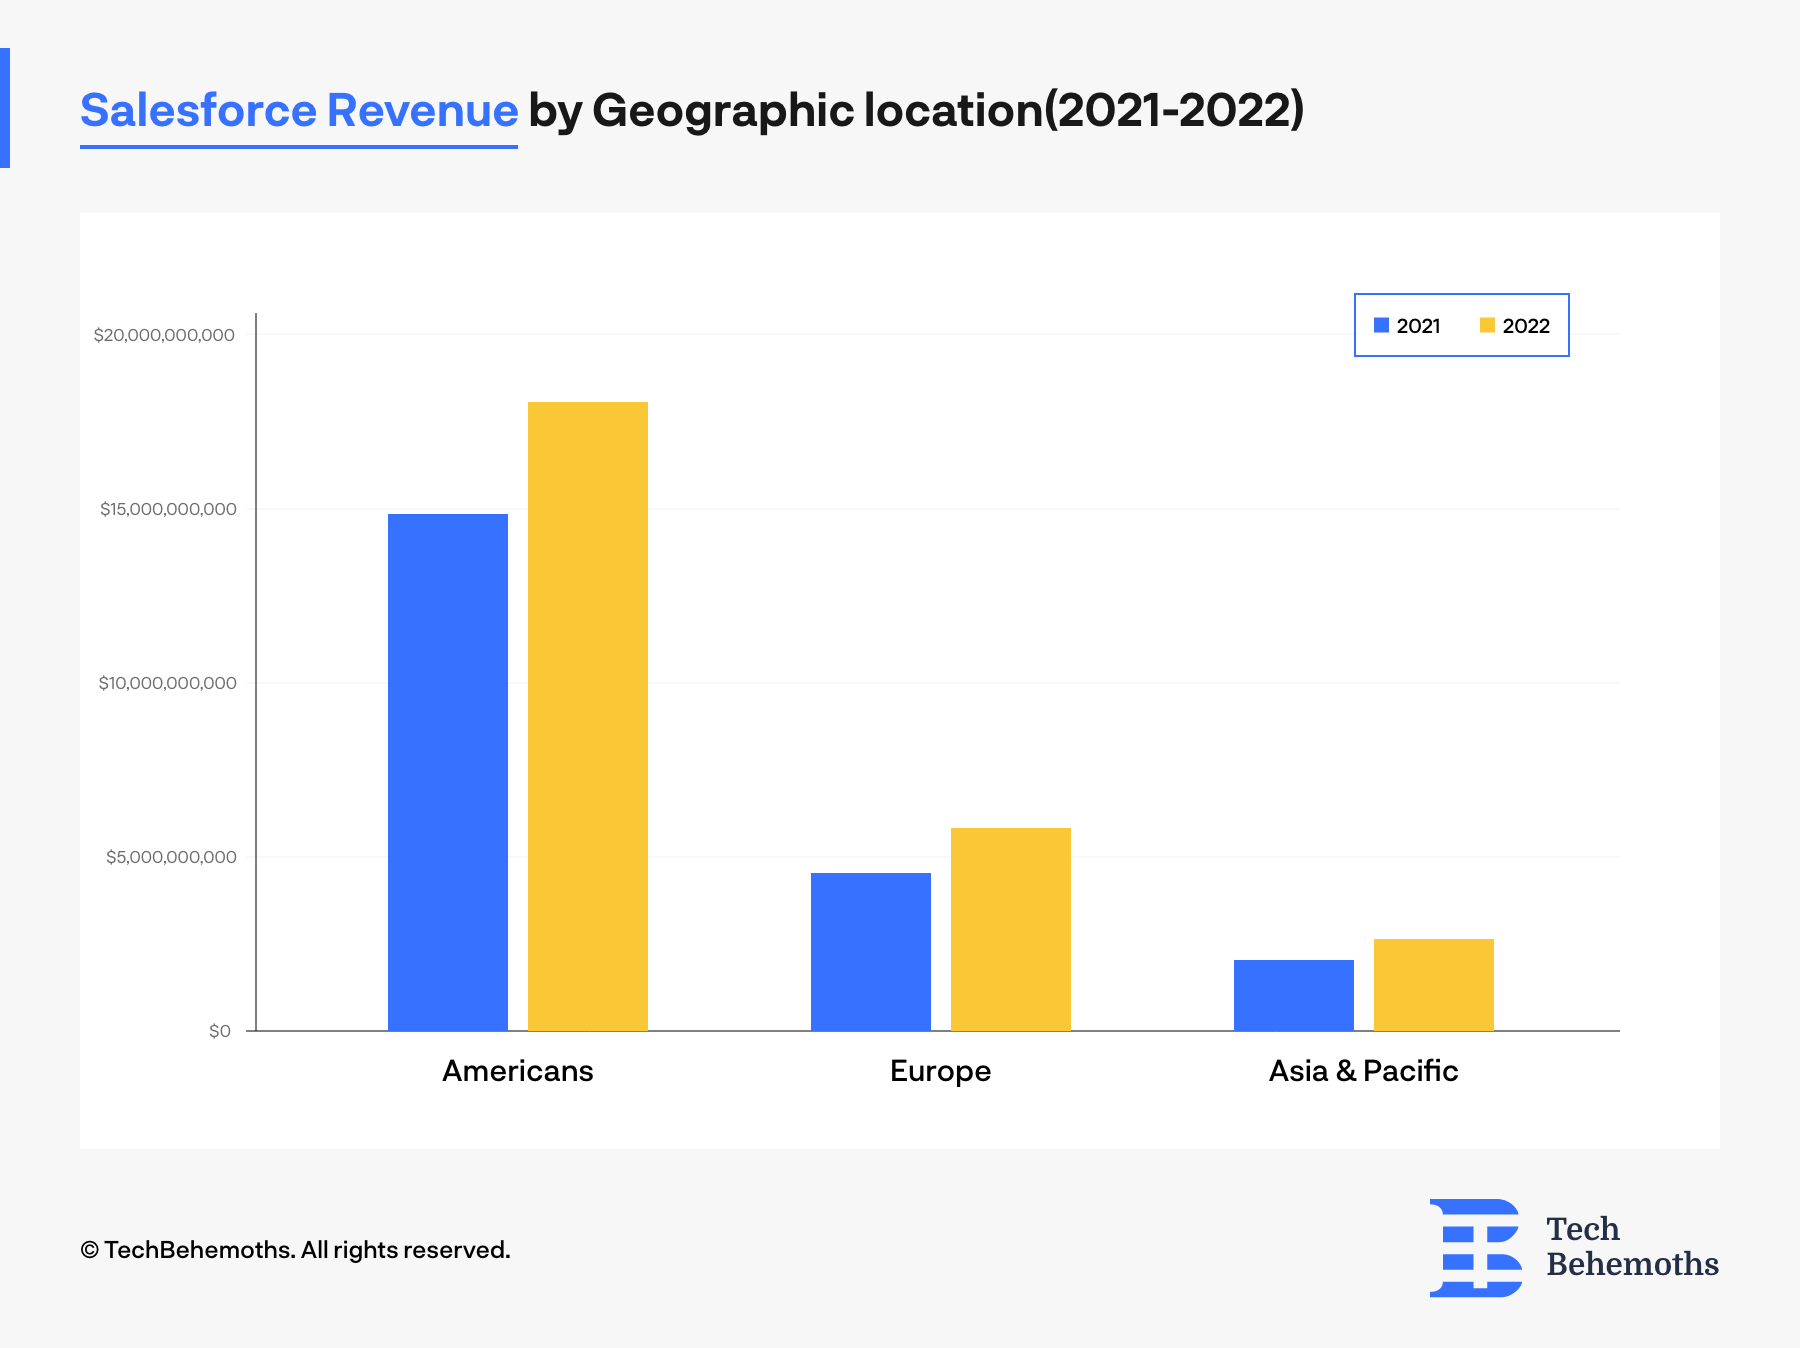 Salesforce revenue by geographic location